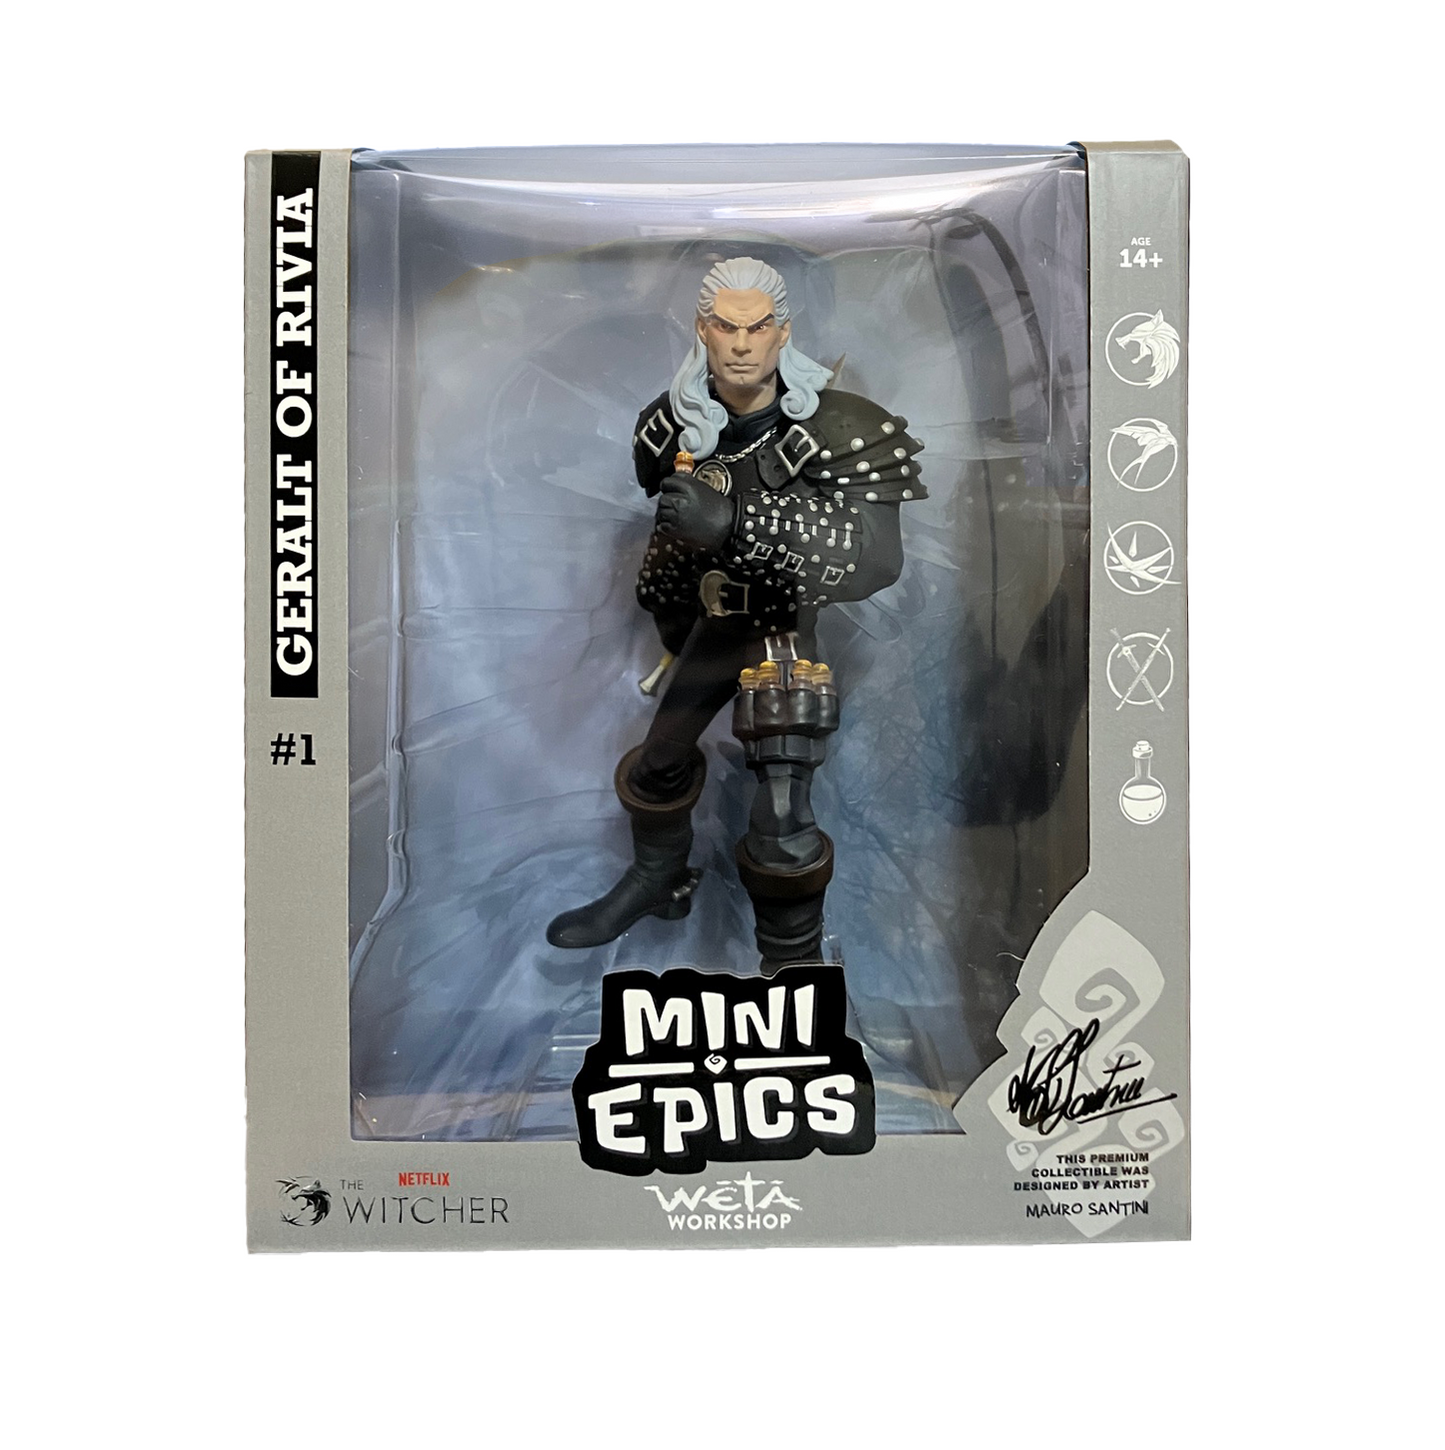 Weta Mini Epic figure of Geralt of Rivia character front view boxed